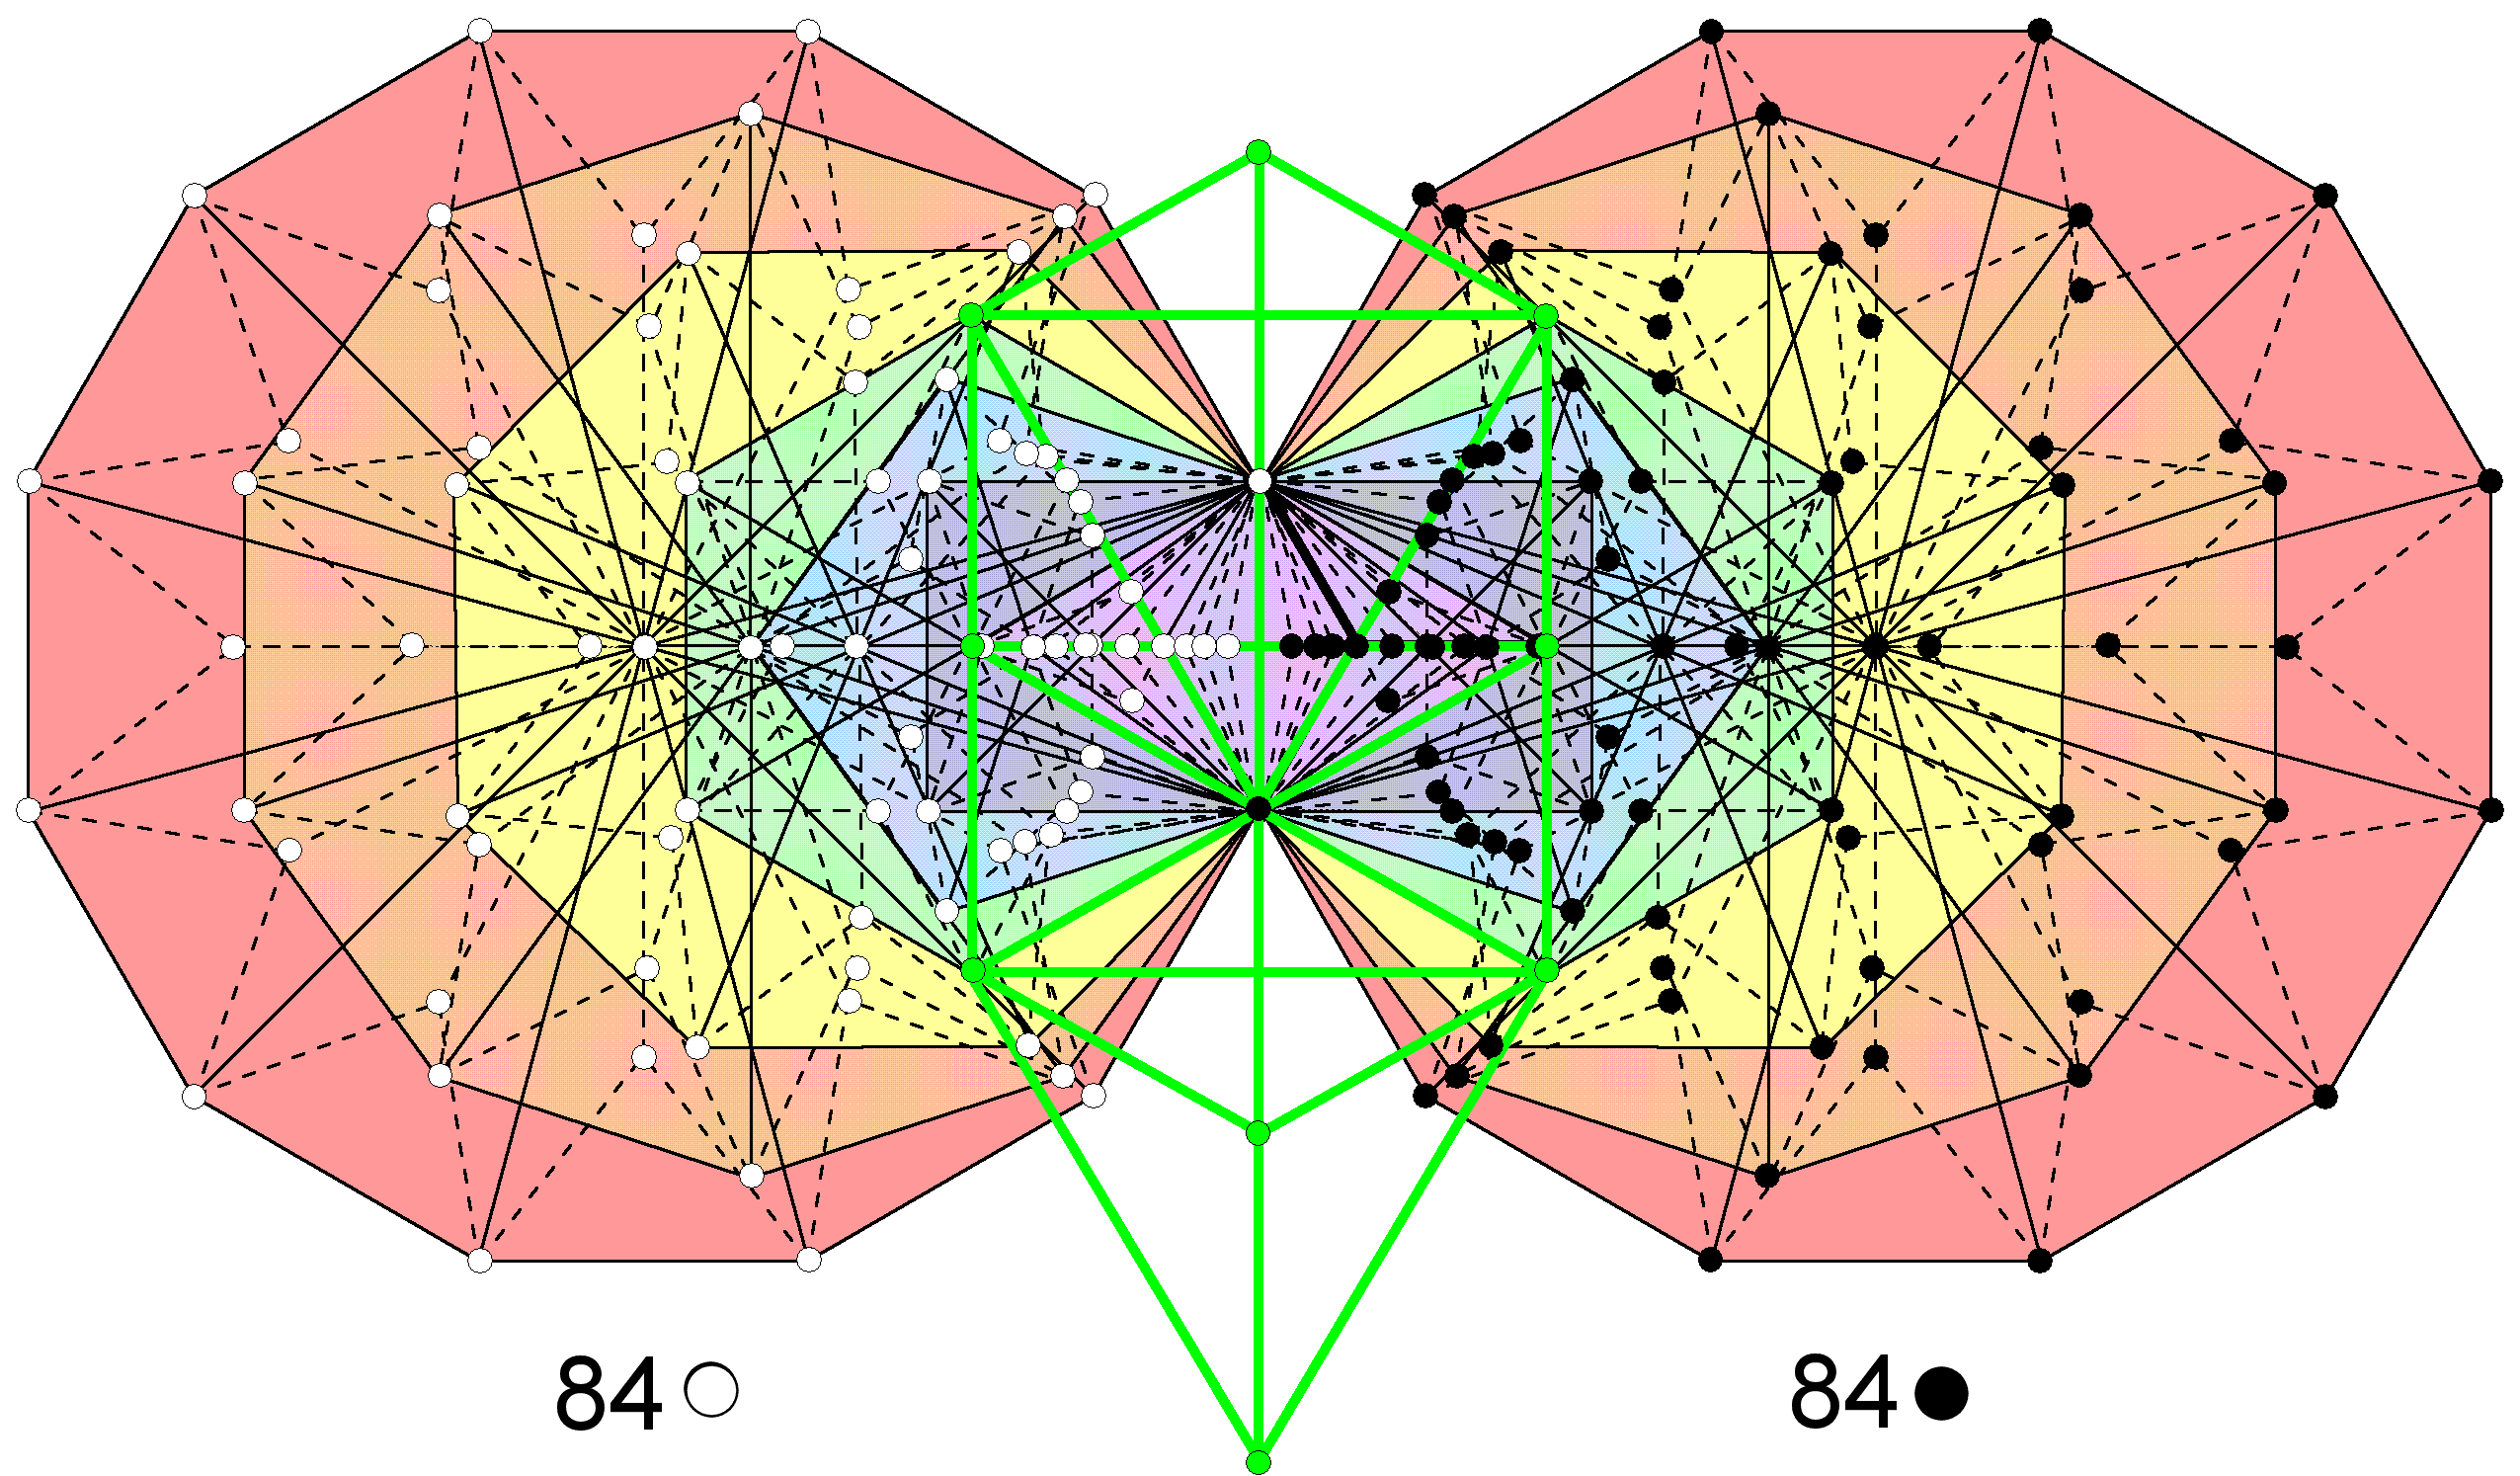 84 intrinsic corners associated with each set of 7 enfolded Type B polygons